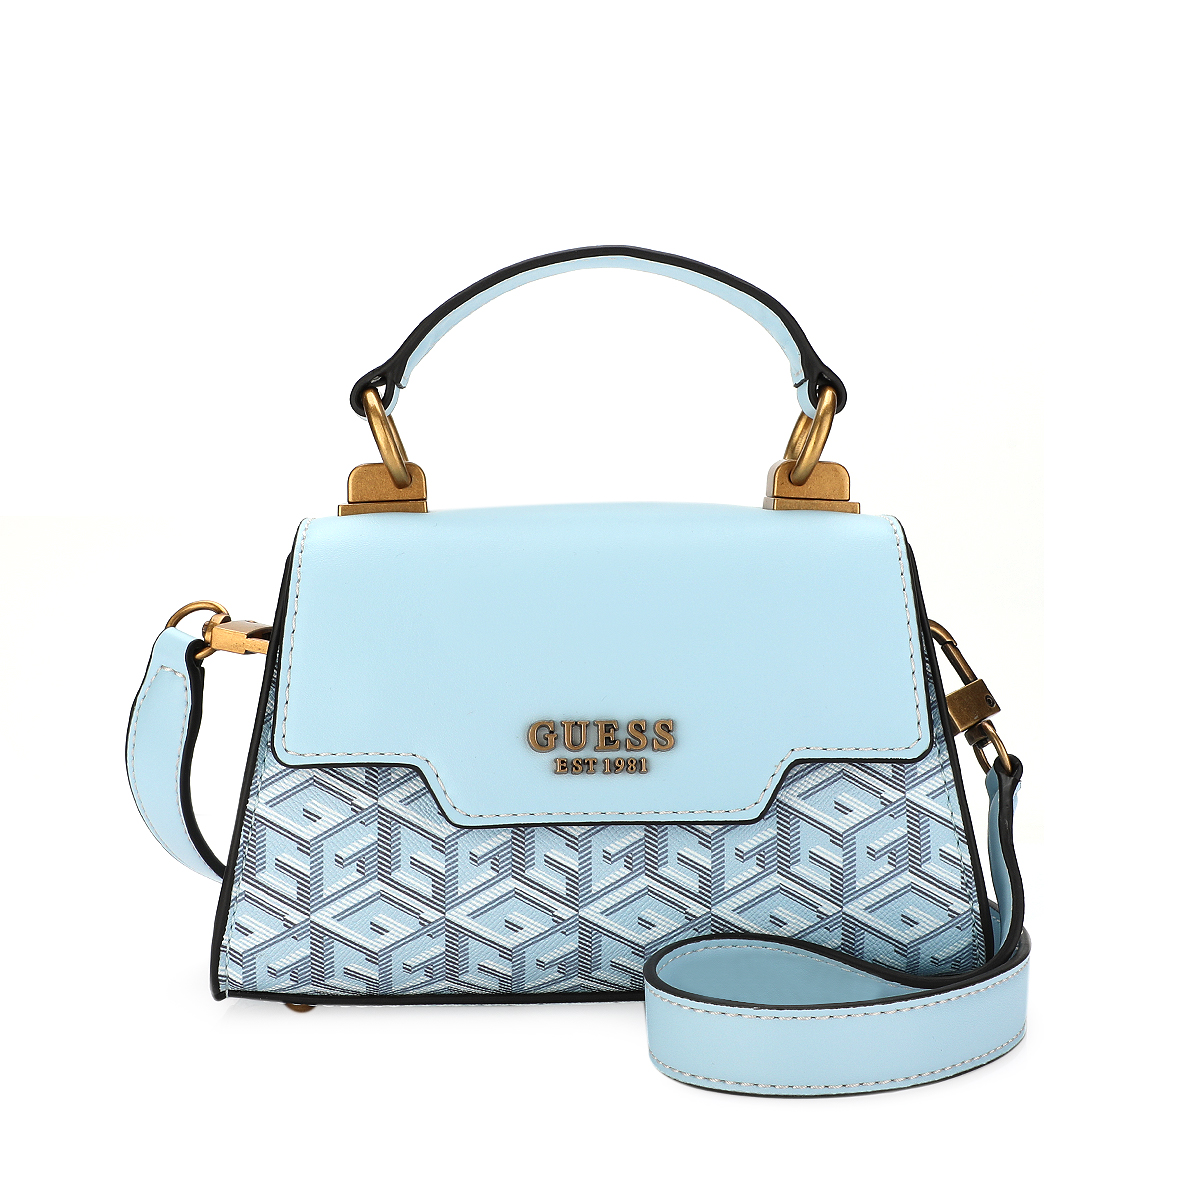 Guess Hallie Pale Logo Crossbody Bag In Pink